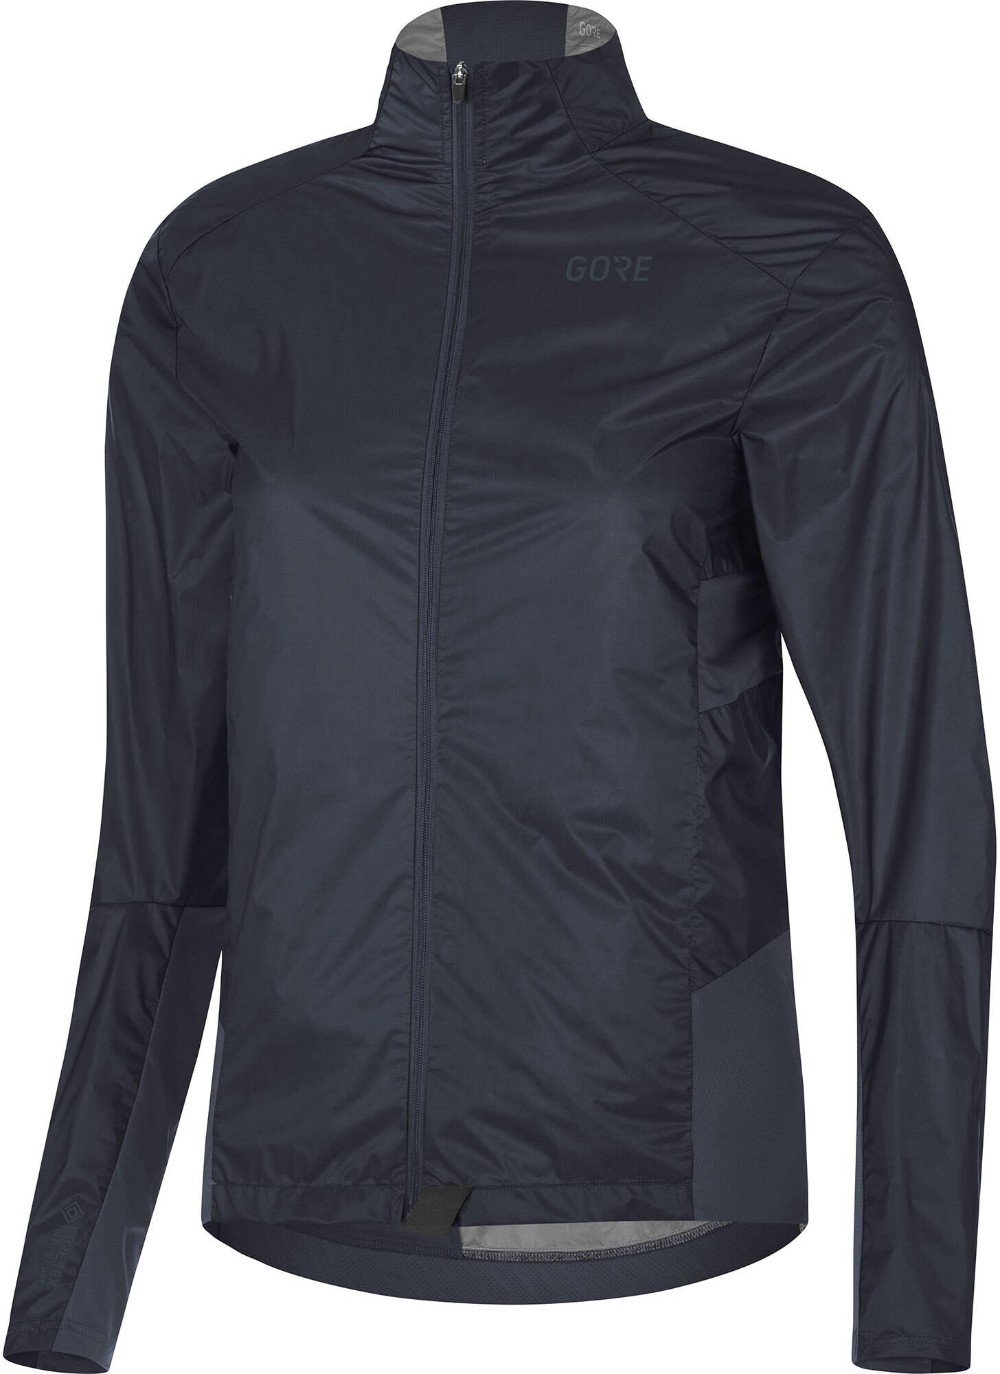 Ambient Womens Jacket image 0